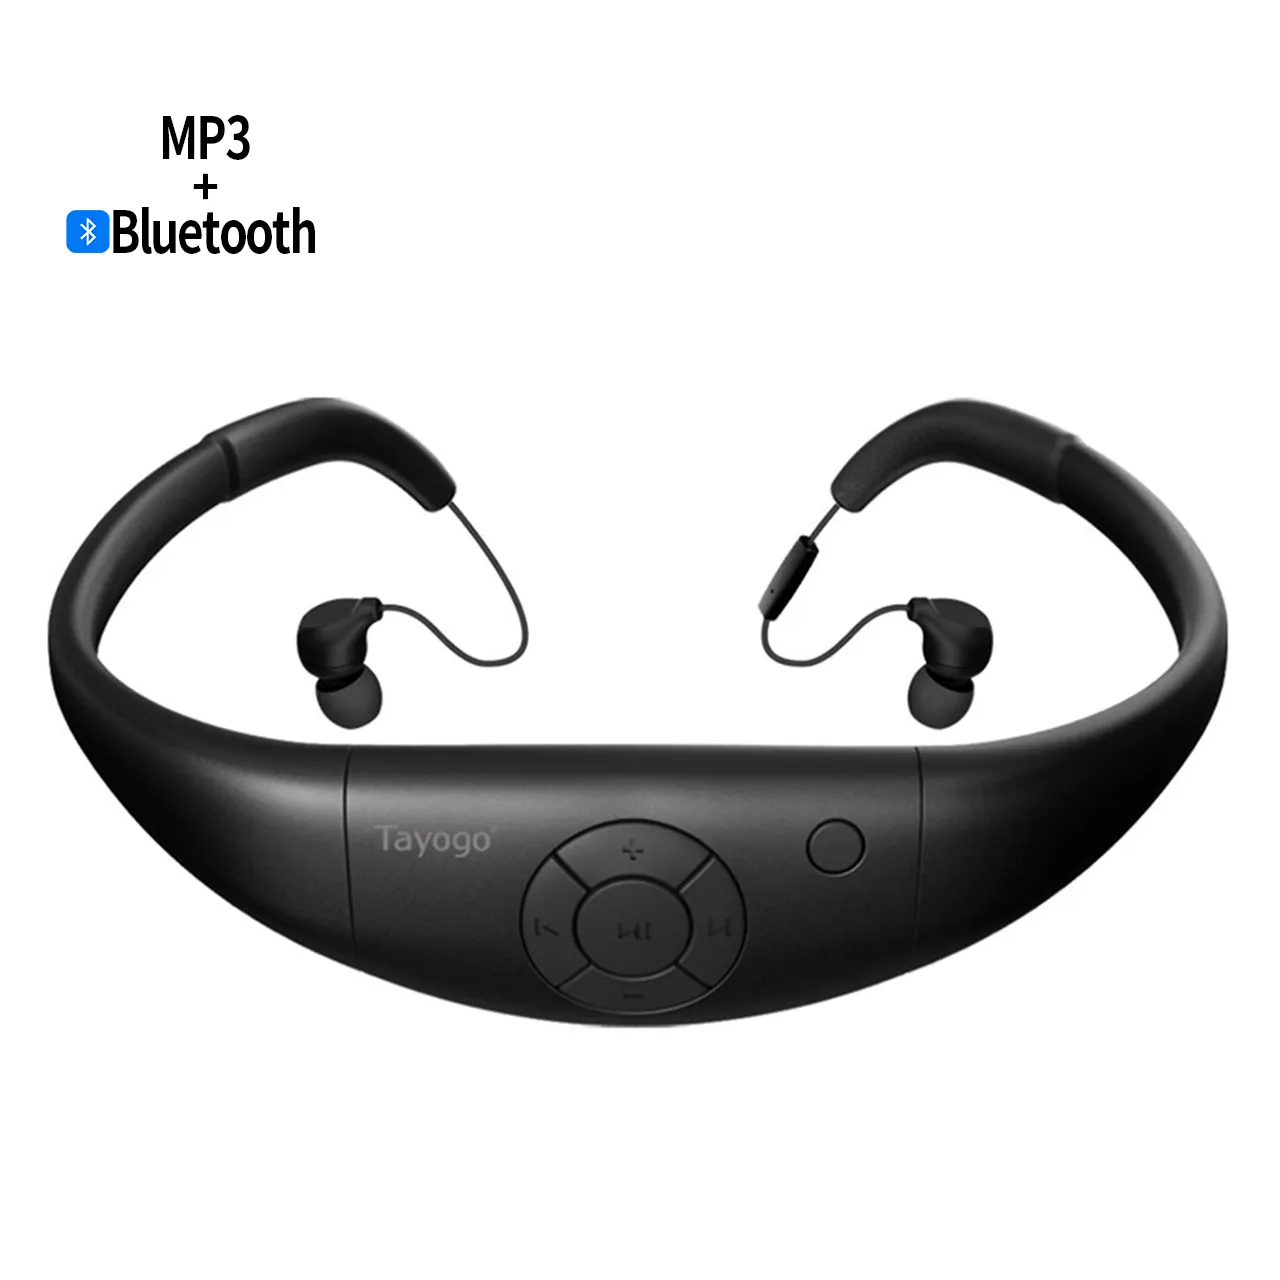 Waterproof MP3 Player for Swimming Wireless Tayogo IPX8 8GB Underwater Headphones with Shuffle Feature, for Water Sports